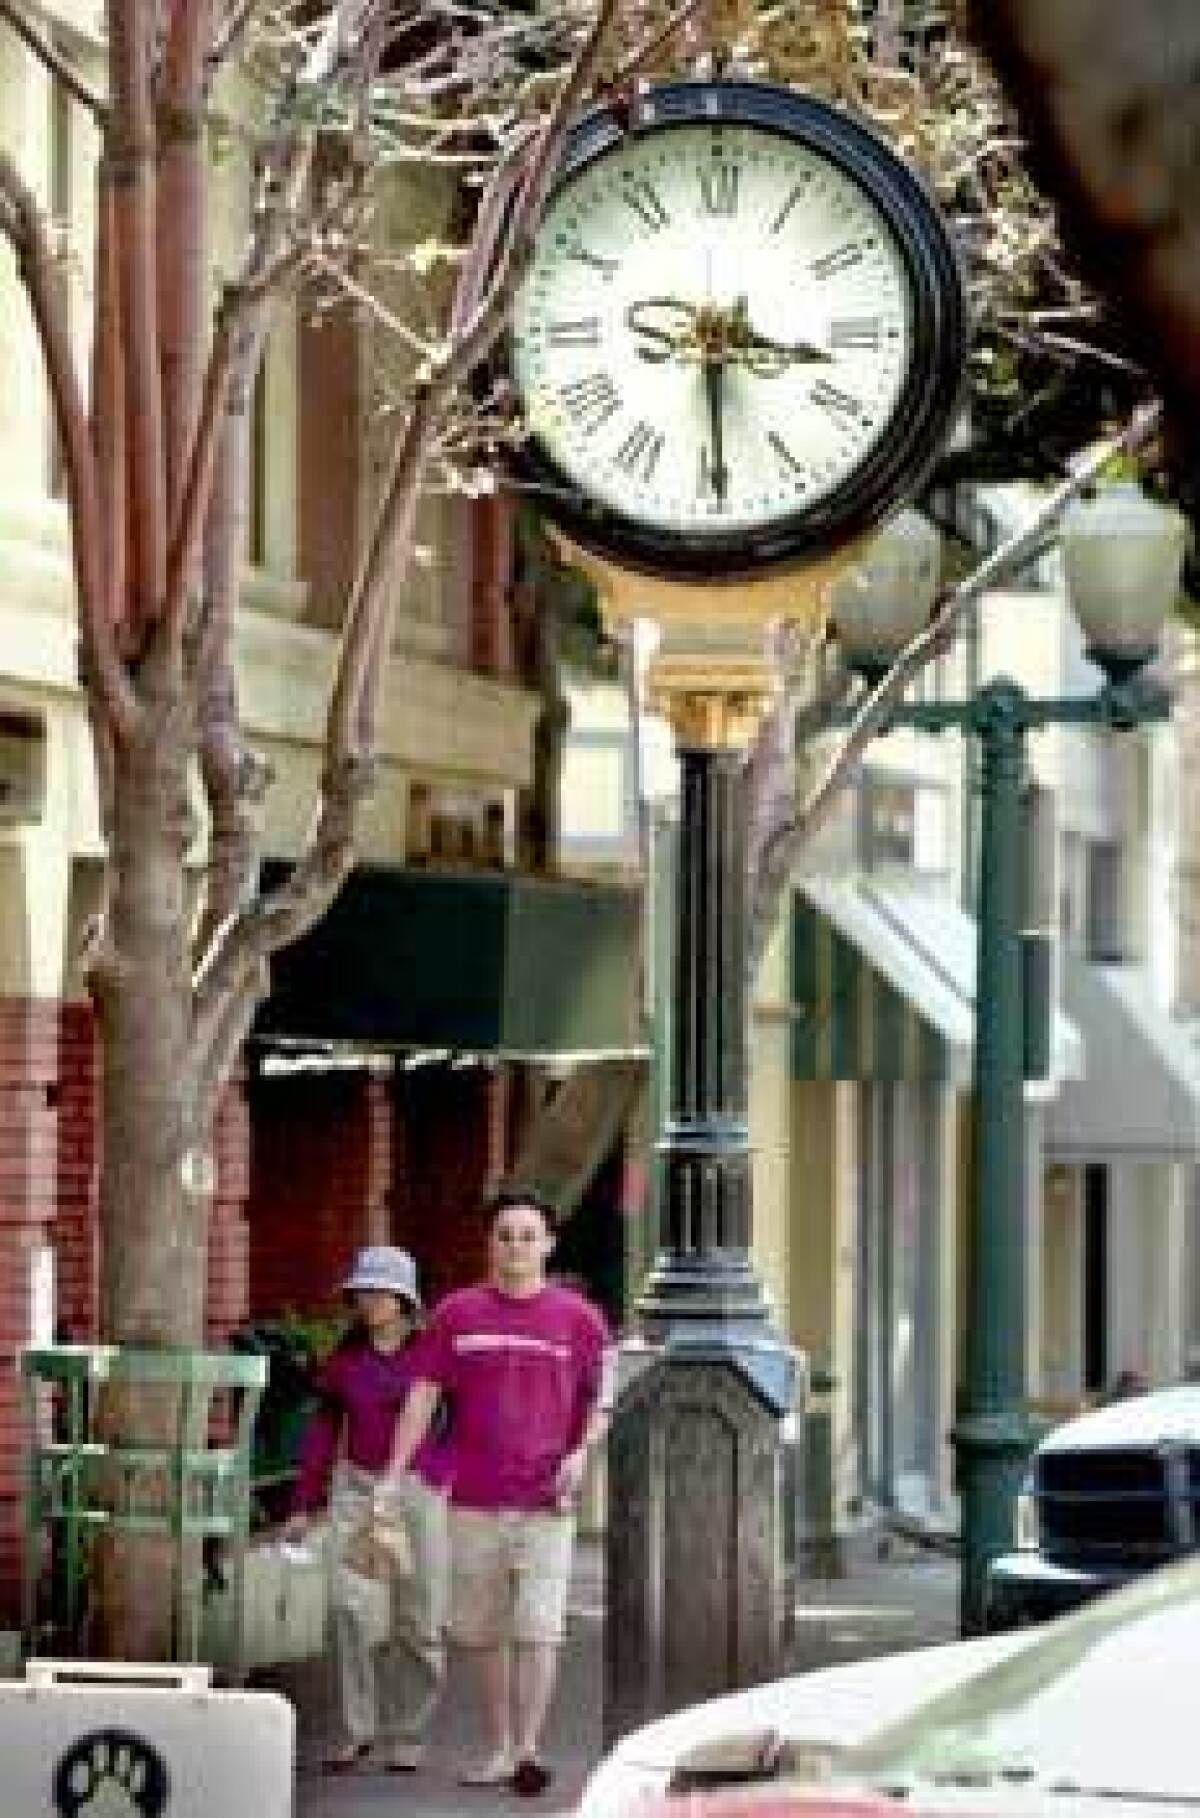 The downtown area of Redlands is welcoming to pedestrians.